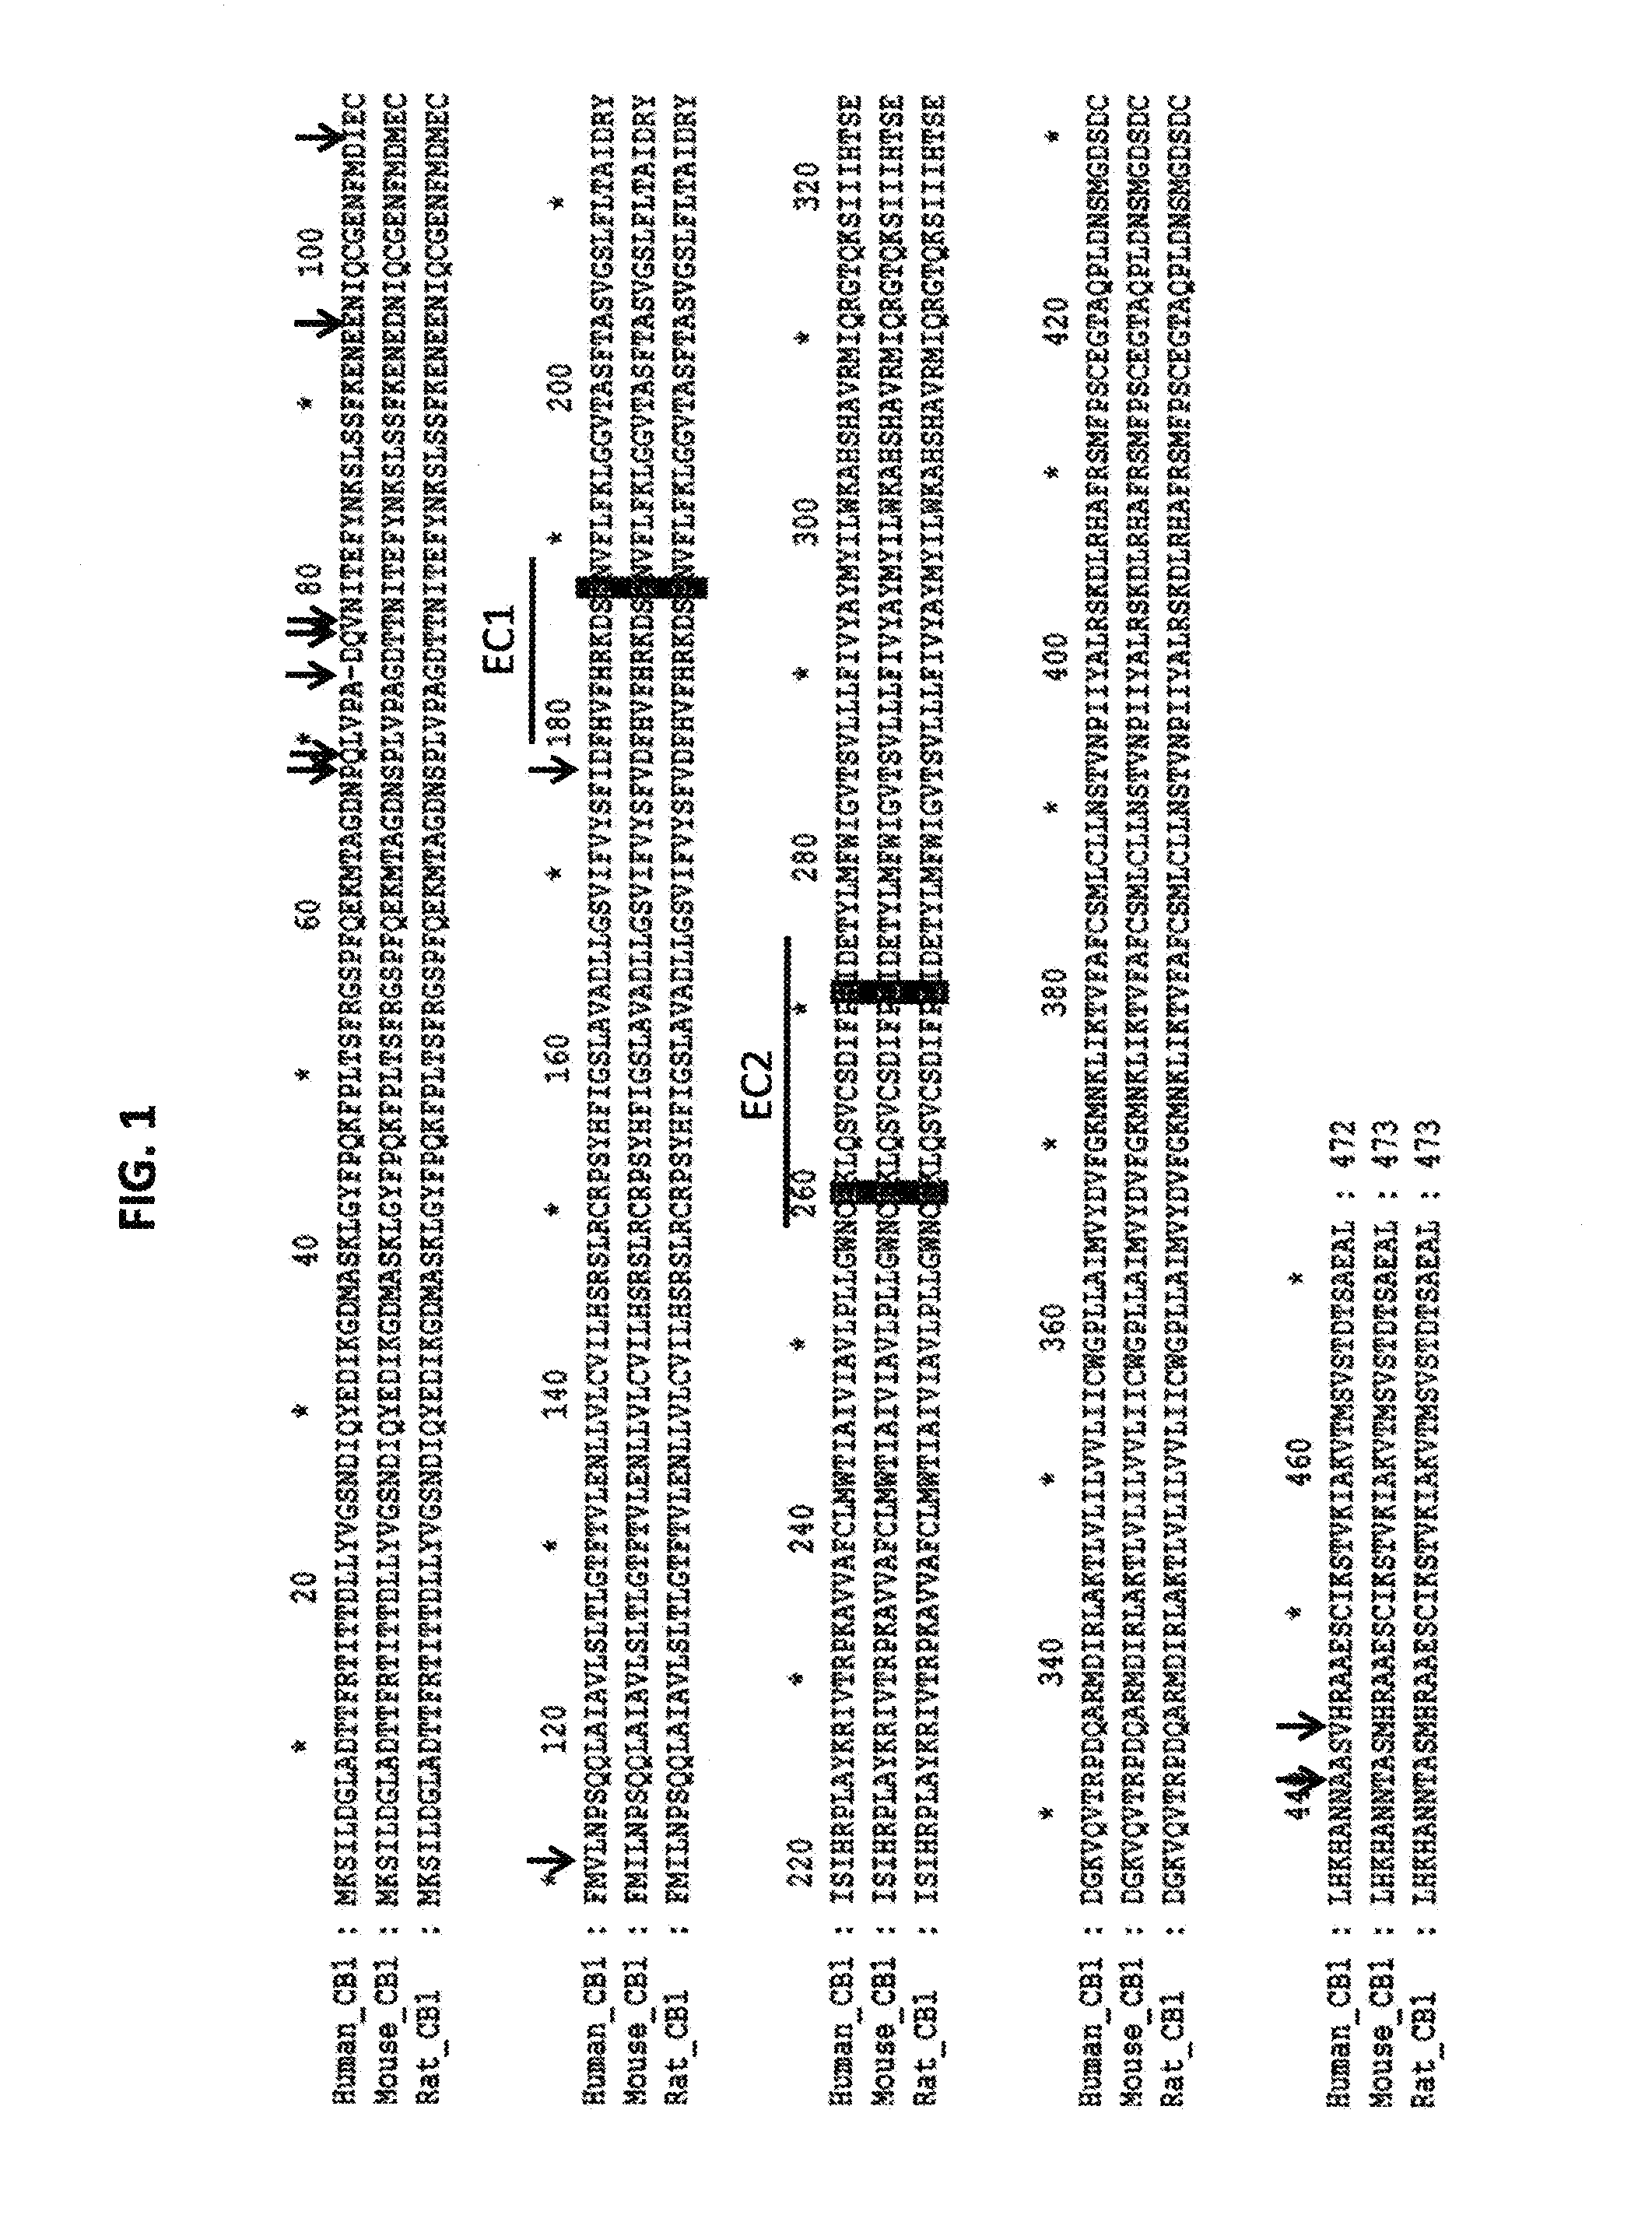 Cb-1 receptor antigen-binding proteins and uses thereof